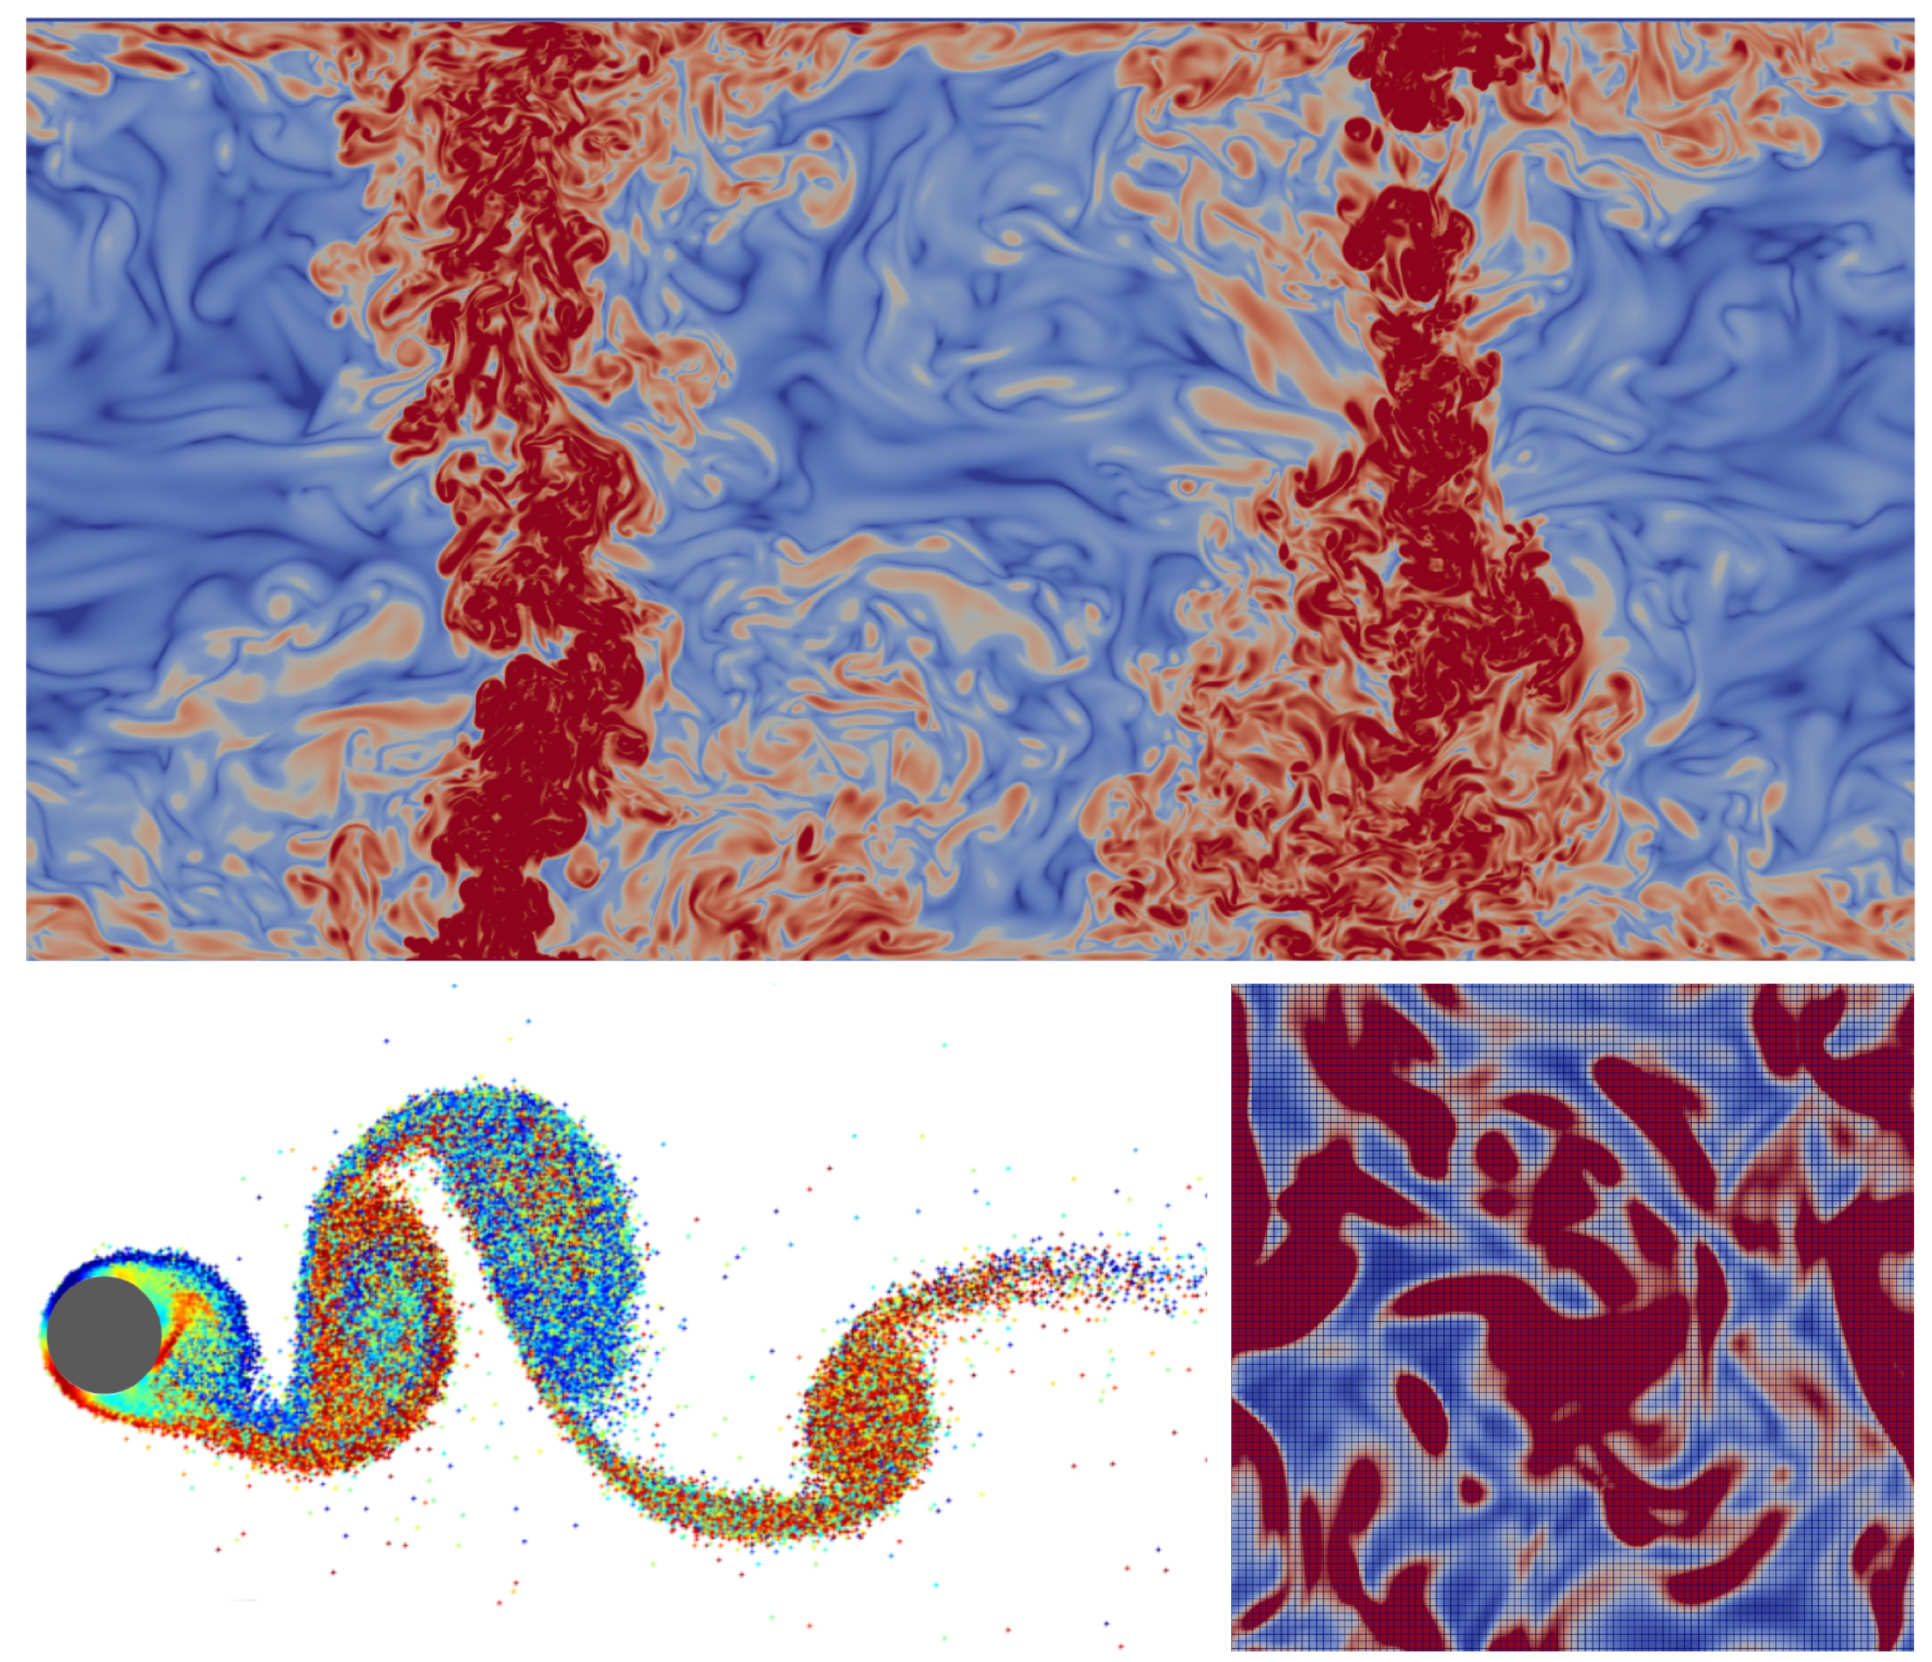 [Top] The enstrophy field from the direct numerical simulation of a confined space heated and cooled by isolated sources of buoyancy, [Bottom-left] A two-dimensional simulation of the flow around a cylinder using the discrete vortex method, [Bottom-right] The enstrophy (a measure of rotational energy) from the simulation of a turbulent thermal plume.